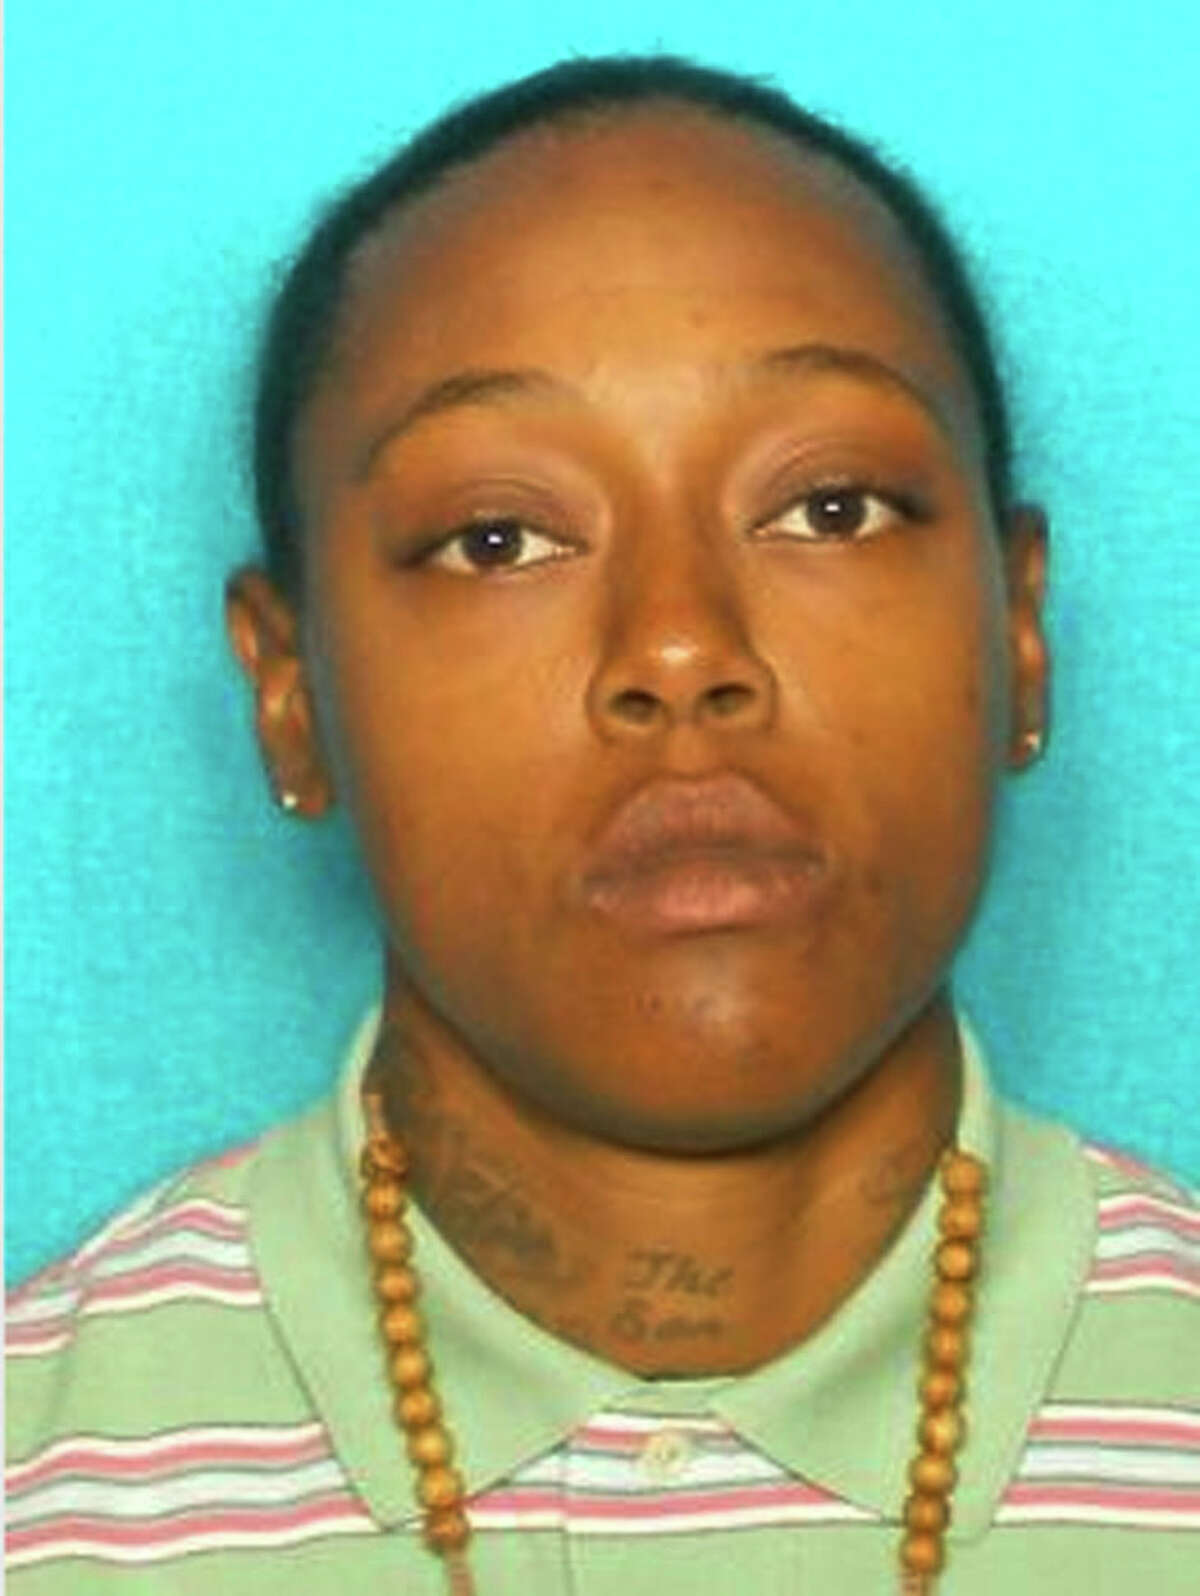 This photo provided by the Galveston County Sheriff's Office shows Britney Cosby, one of two Houston women whose bodies were found last week next to a dumpster in Port Bolivar. The father of one of two women who were slain and their bodies dumped next to a trash bin on the Bolivar Peninsula near Galveston has been charged with evidence tampering in both deaths, officials said Thursday, March 11, 2014. James Larry Cosby, 46, from nearby Houston, remains jailed on $500,000 bond, said Galveston County Sheriff Henry Trochesset. Trochesset said the investigation is ongoing and charges against Cosby could be upgraded to capital murder. (AP Photo/Galveston County Sheriff's Office)